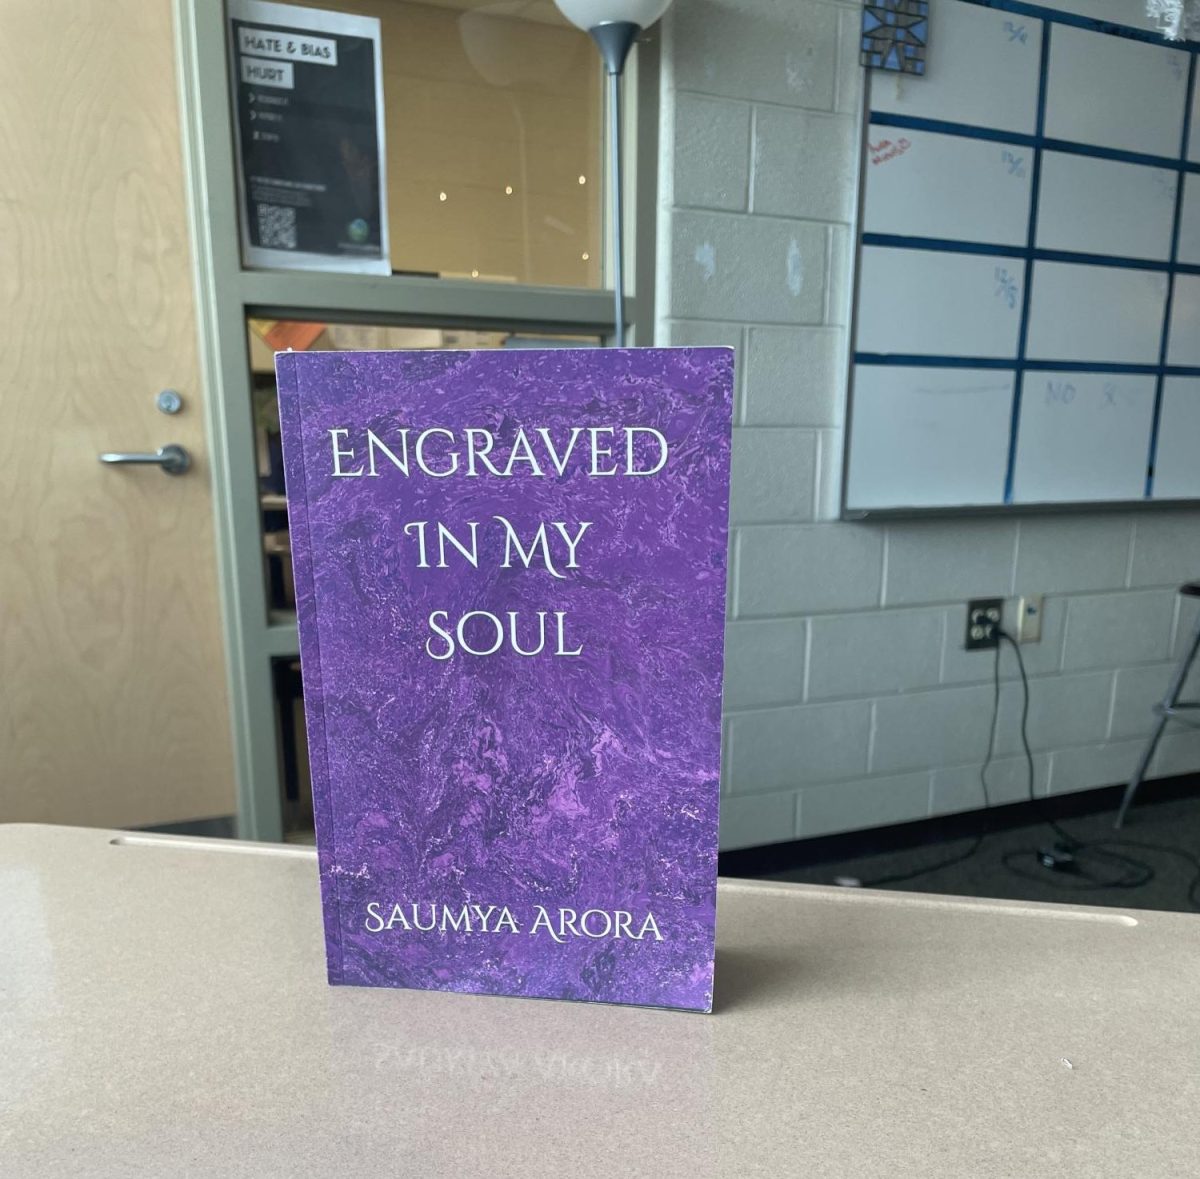 A copy of “Engraved In My Soul”. December 14, 2023.